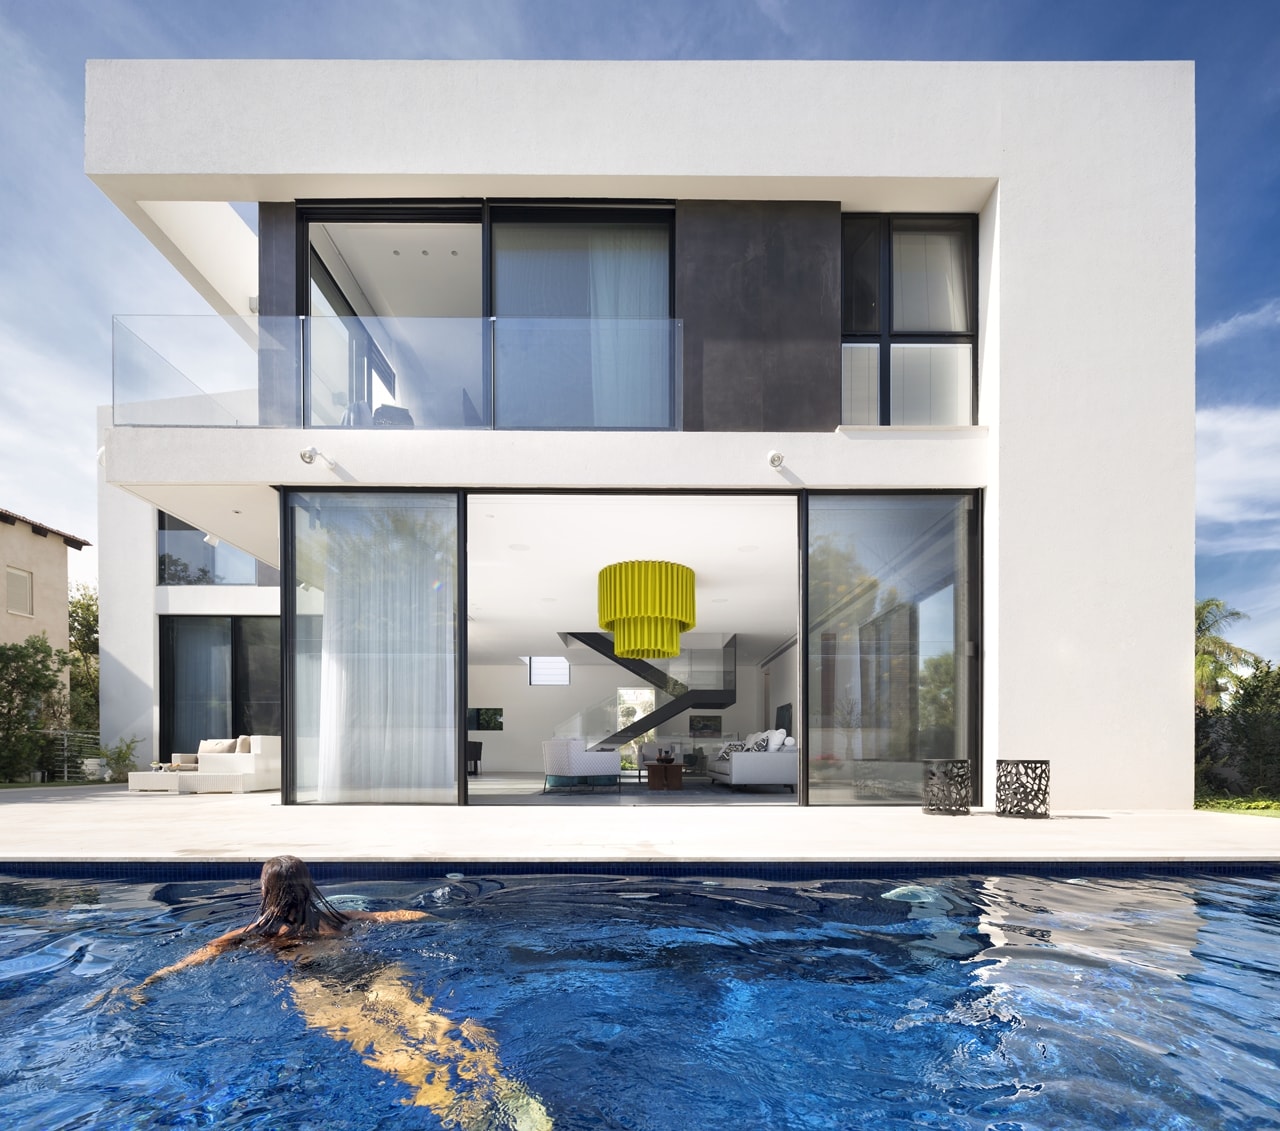 Simple Modern House with an Amazing Floating Stairs - Architecture Beast